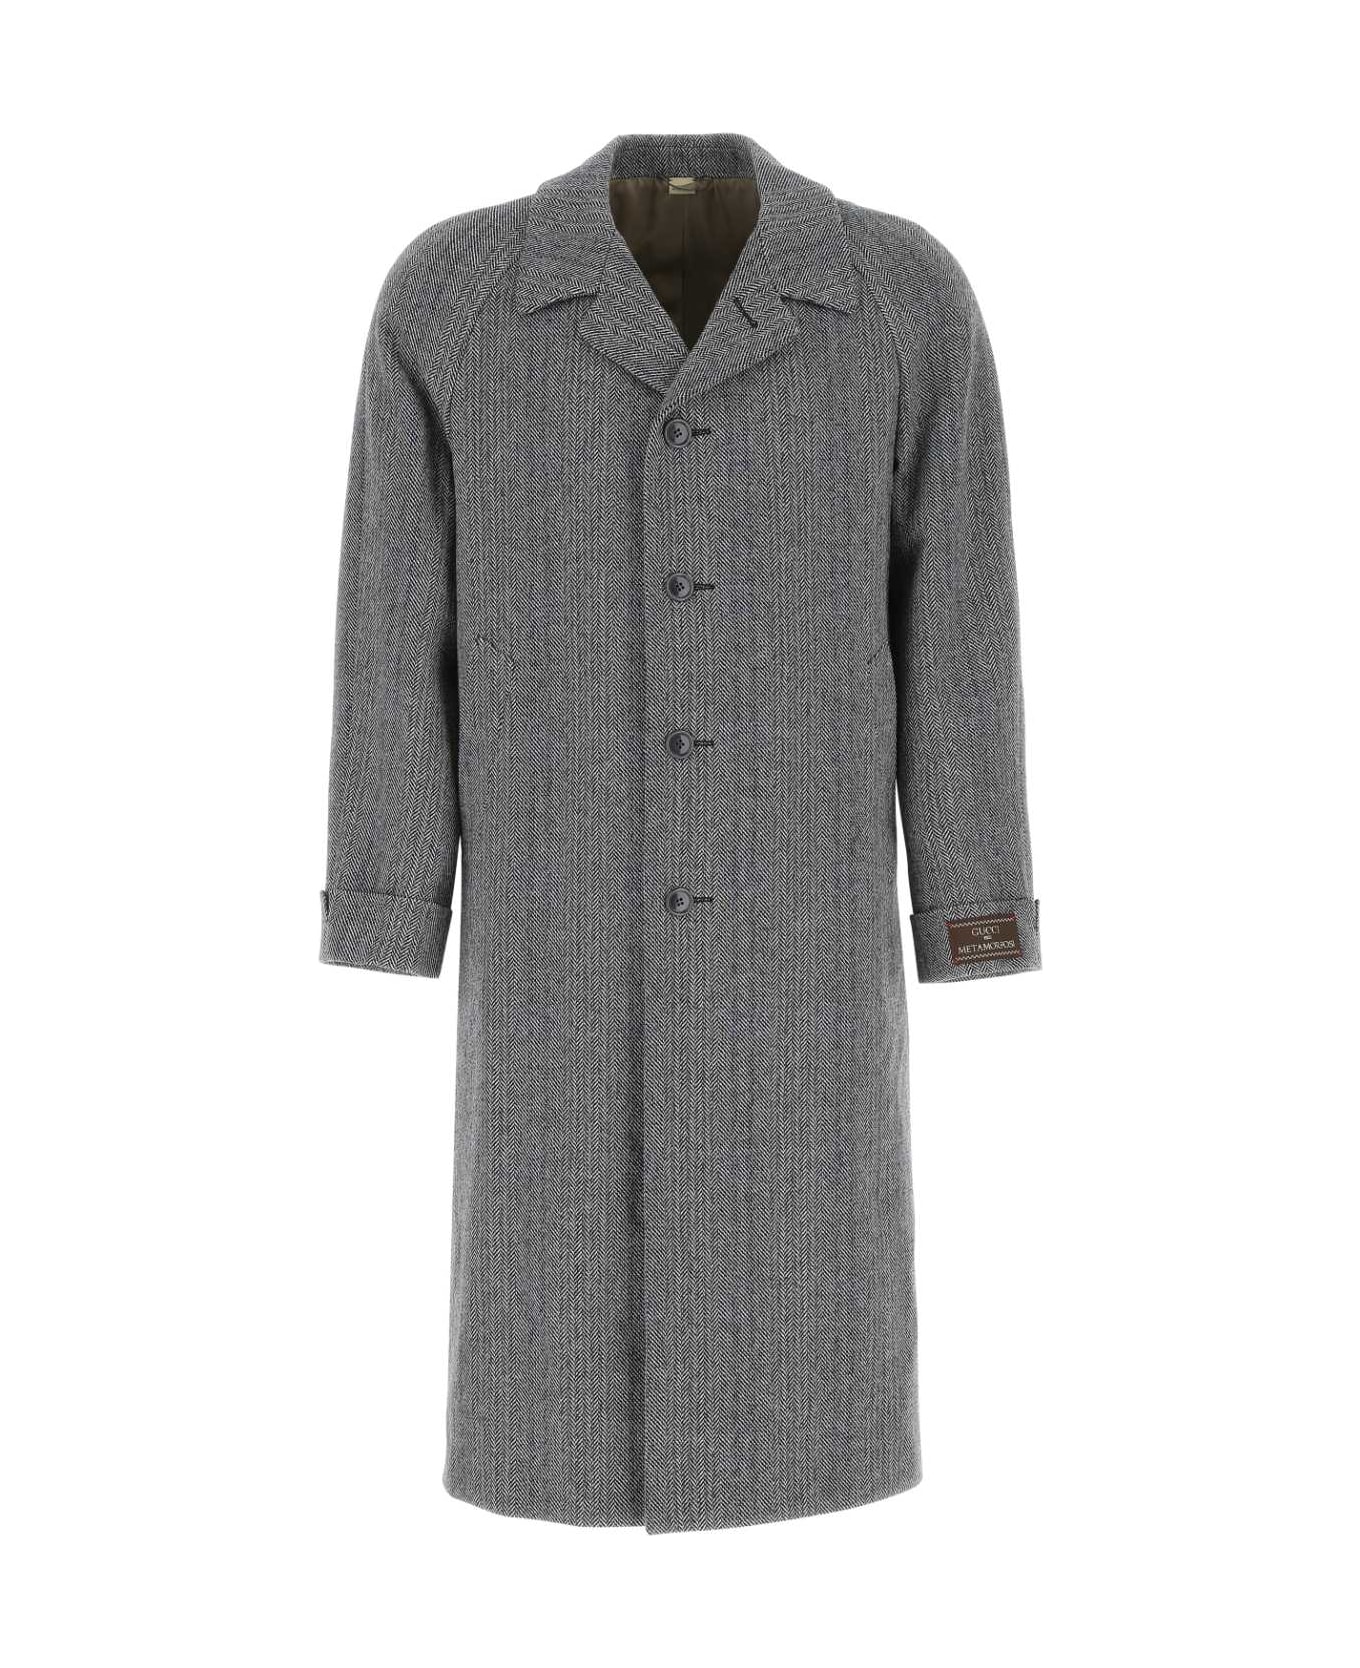 Gucci Embroidered Wool Blend Coat - 1960